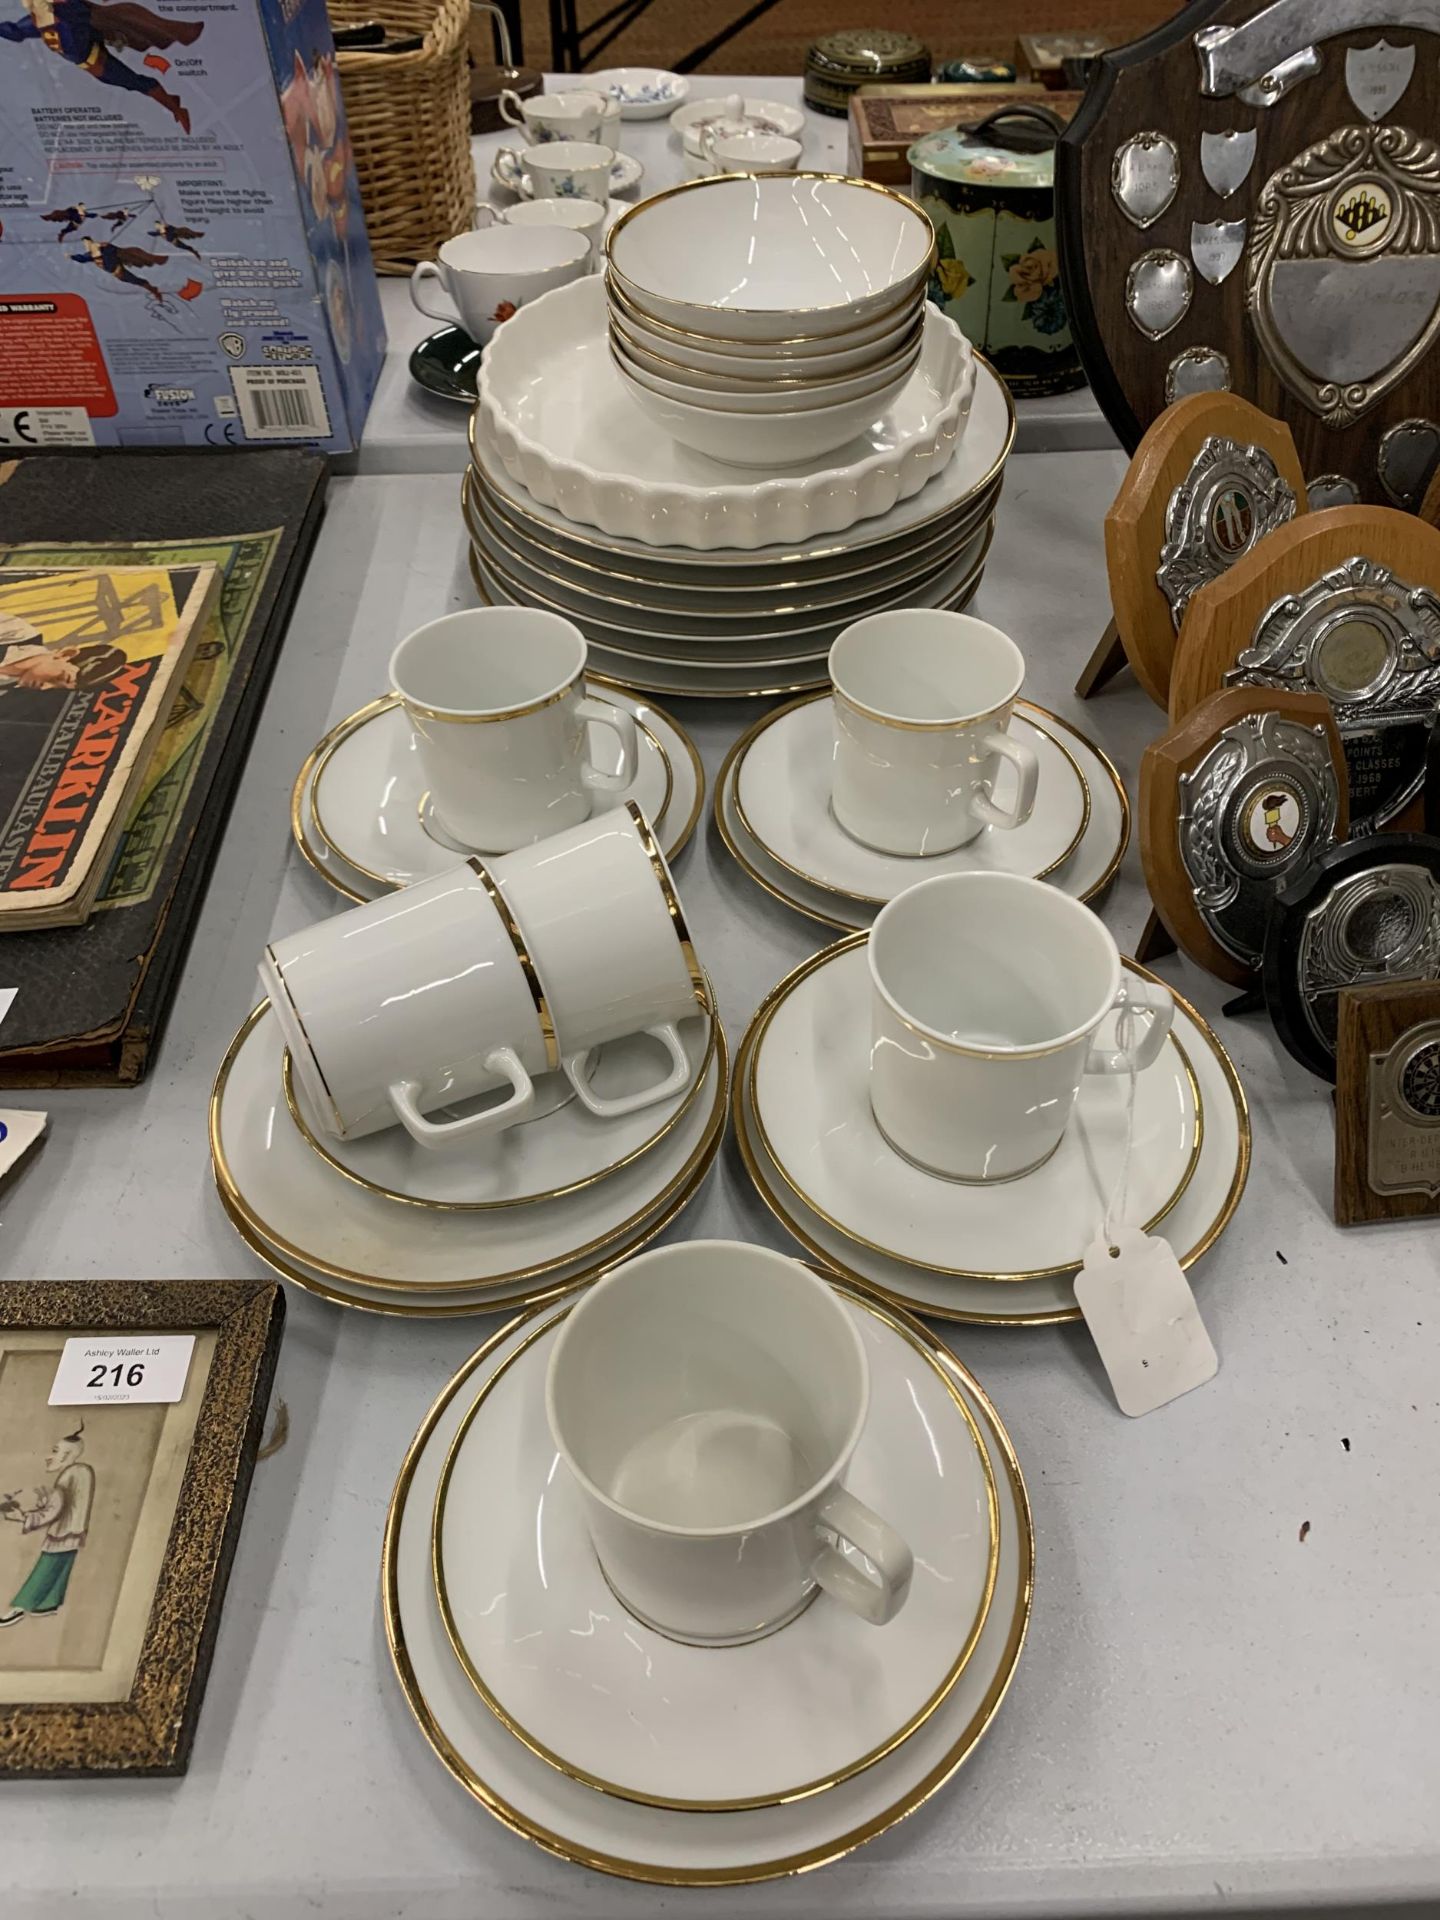 AN ESCHENBACH GERMAN PART DINNER SERVICE TO INCLUDE VARIOUS SIZED PLATES, BOWLS, CUPS, SAUCERS, ETC